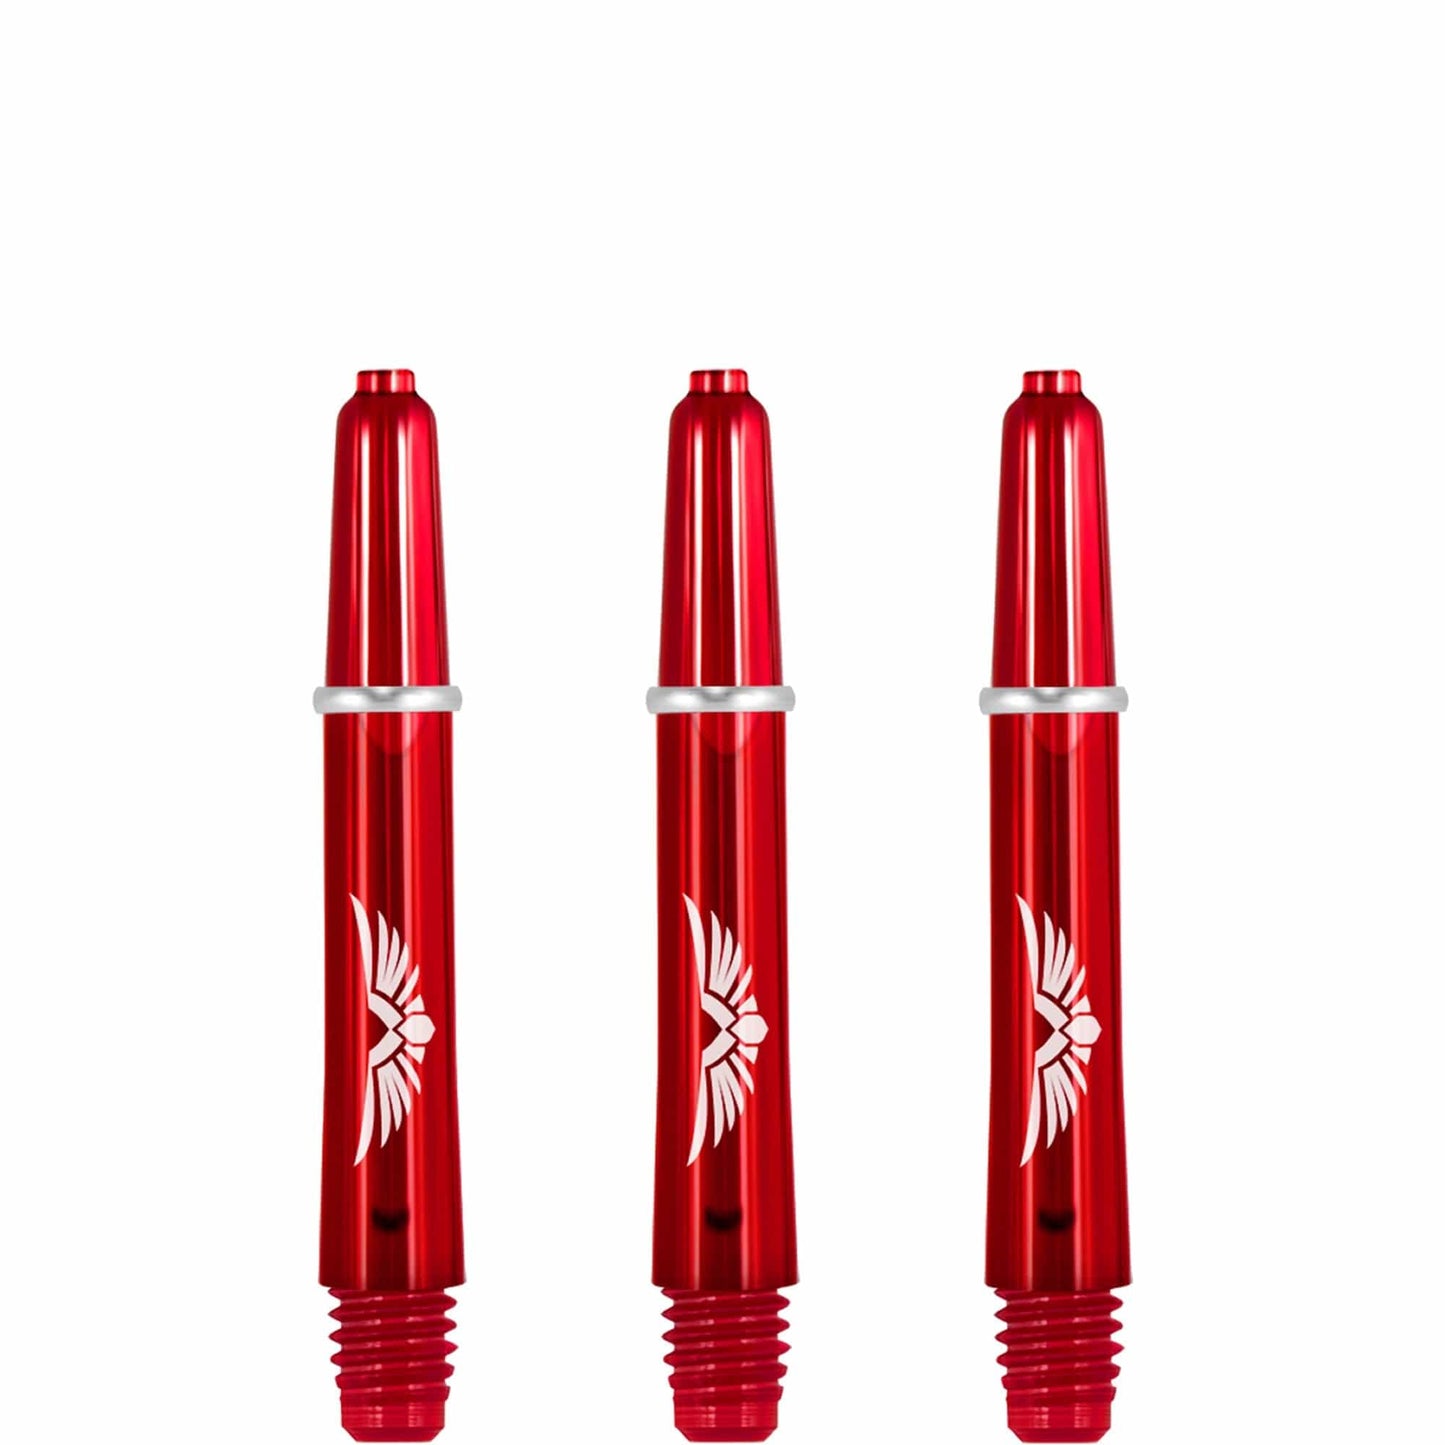 Shot Eagle Claw Dart Shafts - with Machined Rings - Strong Polycarbonate Stems - Red Short